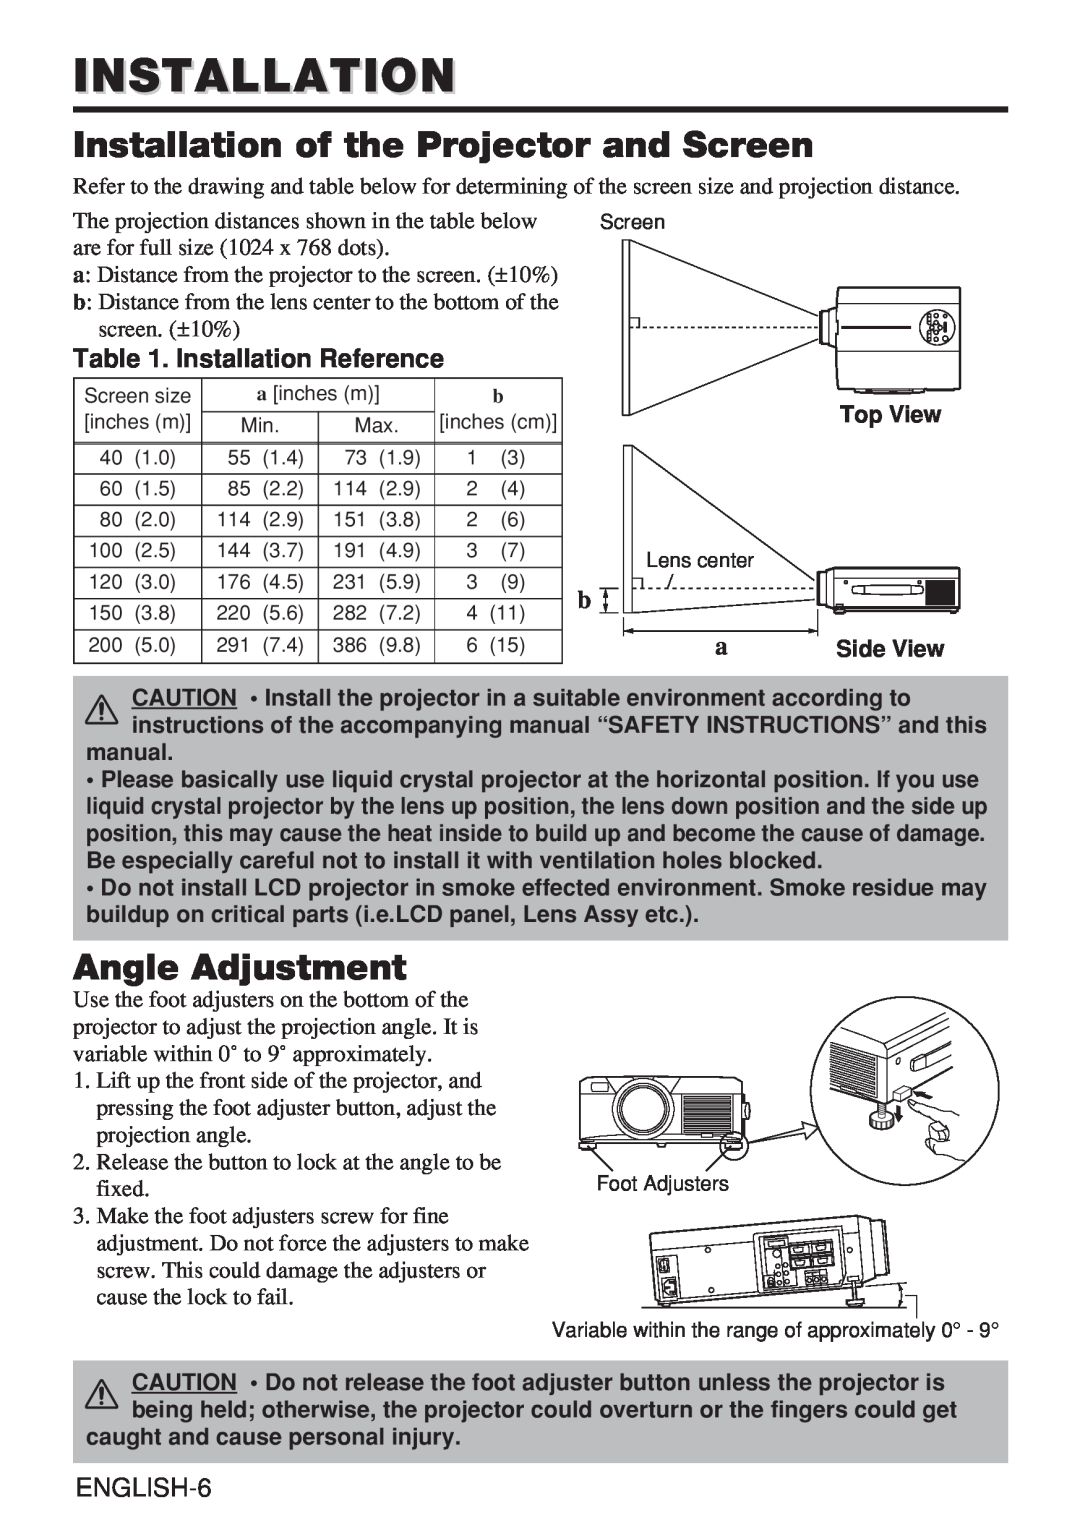 Hitachi CP-X980W user manual Installation of the Projector and Screen, Angle Adjustment, Installation Reference 